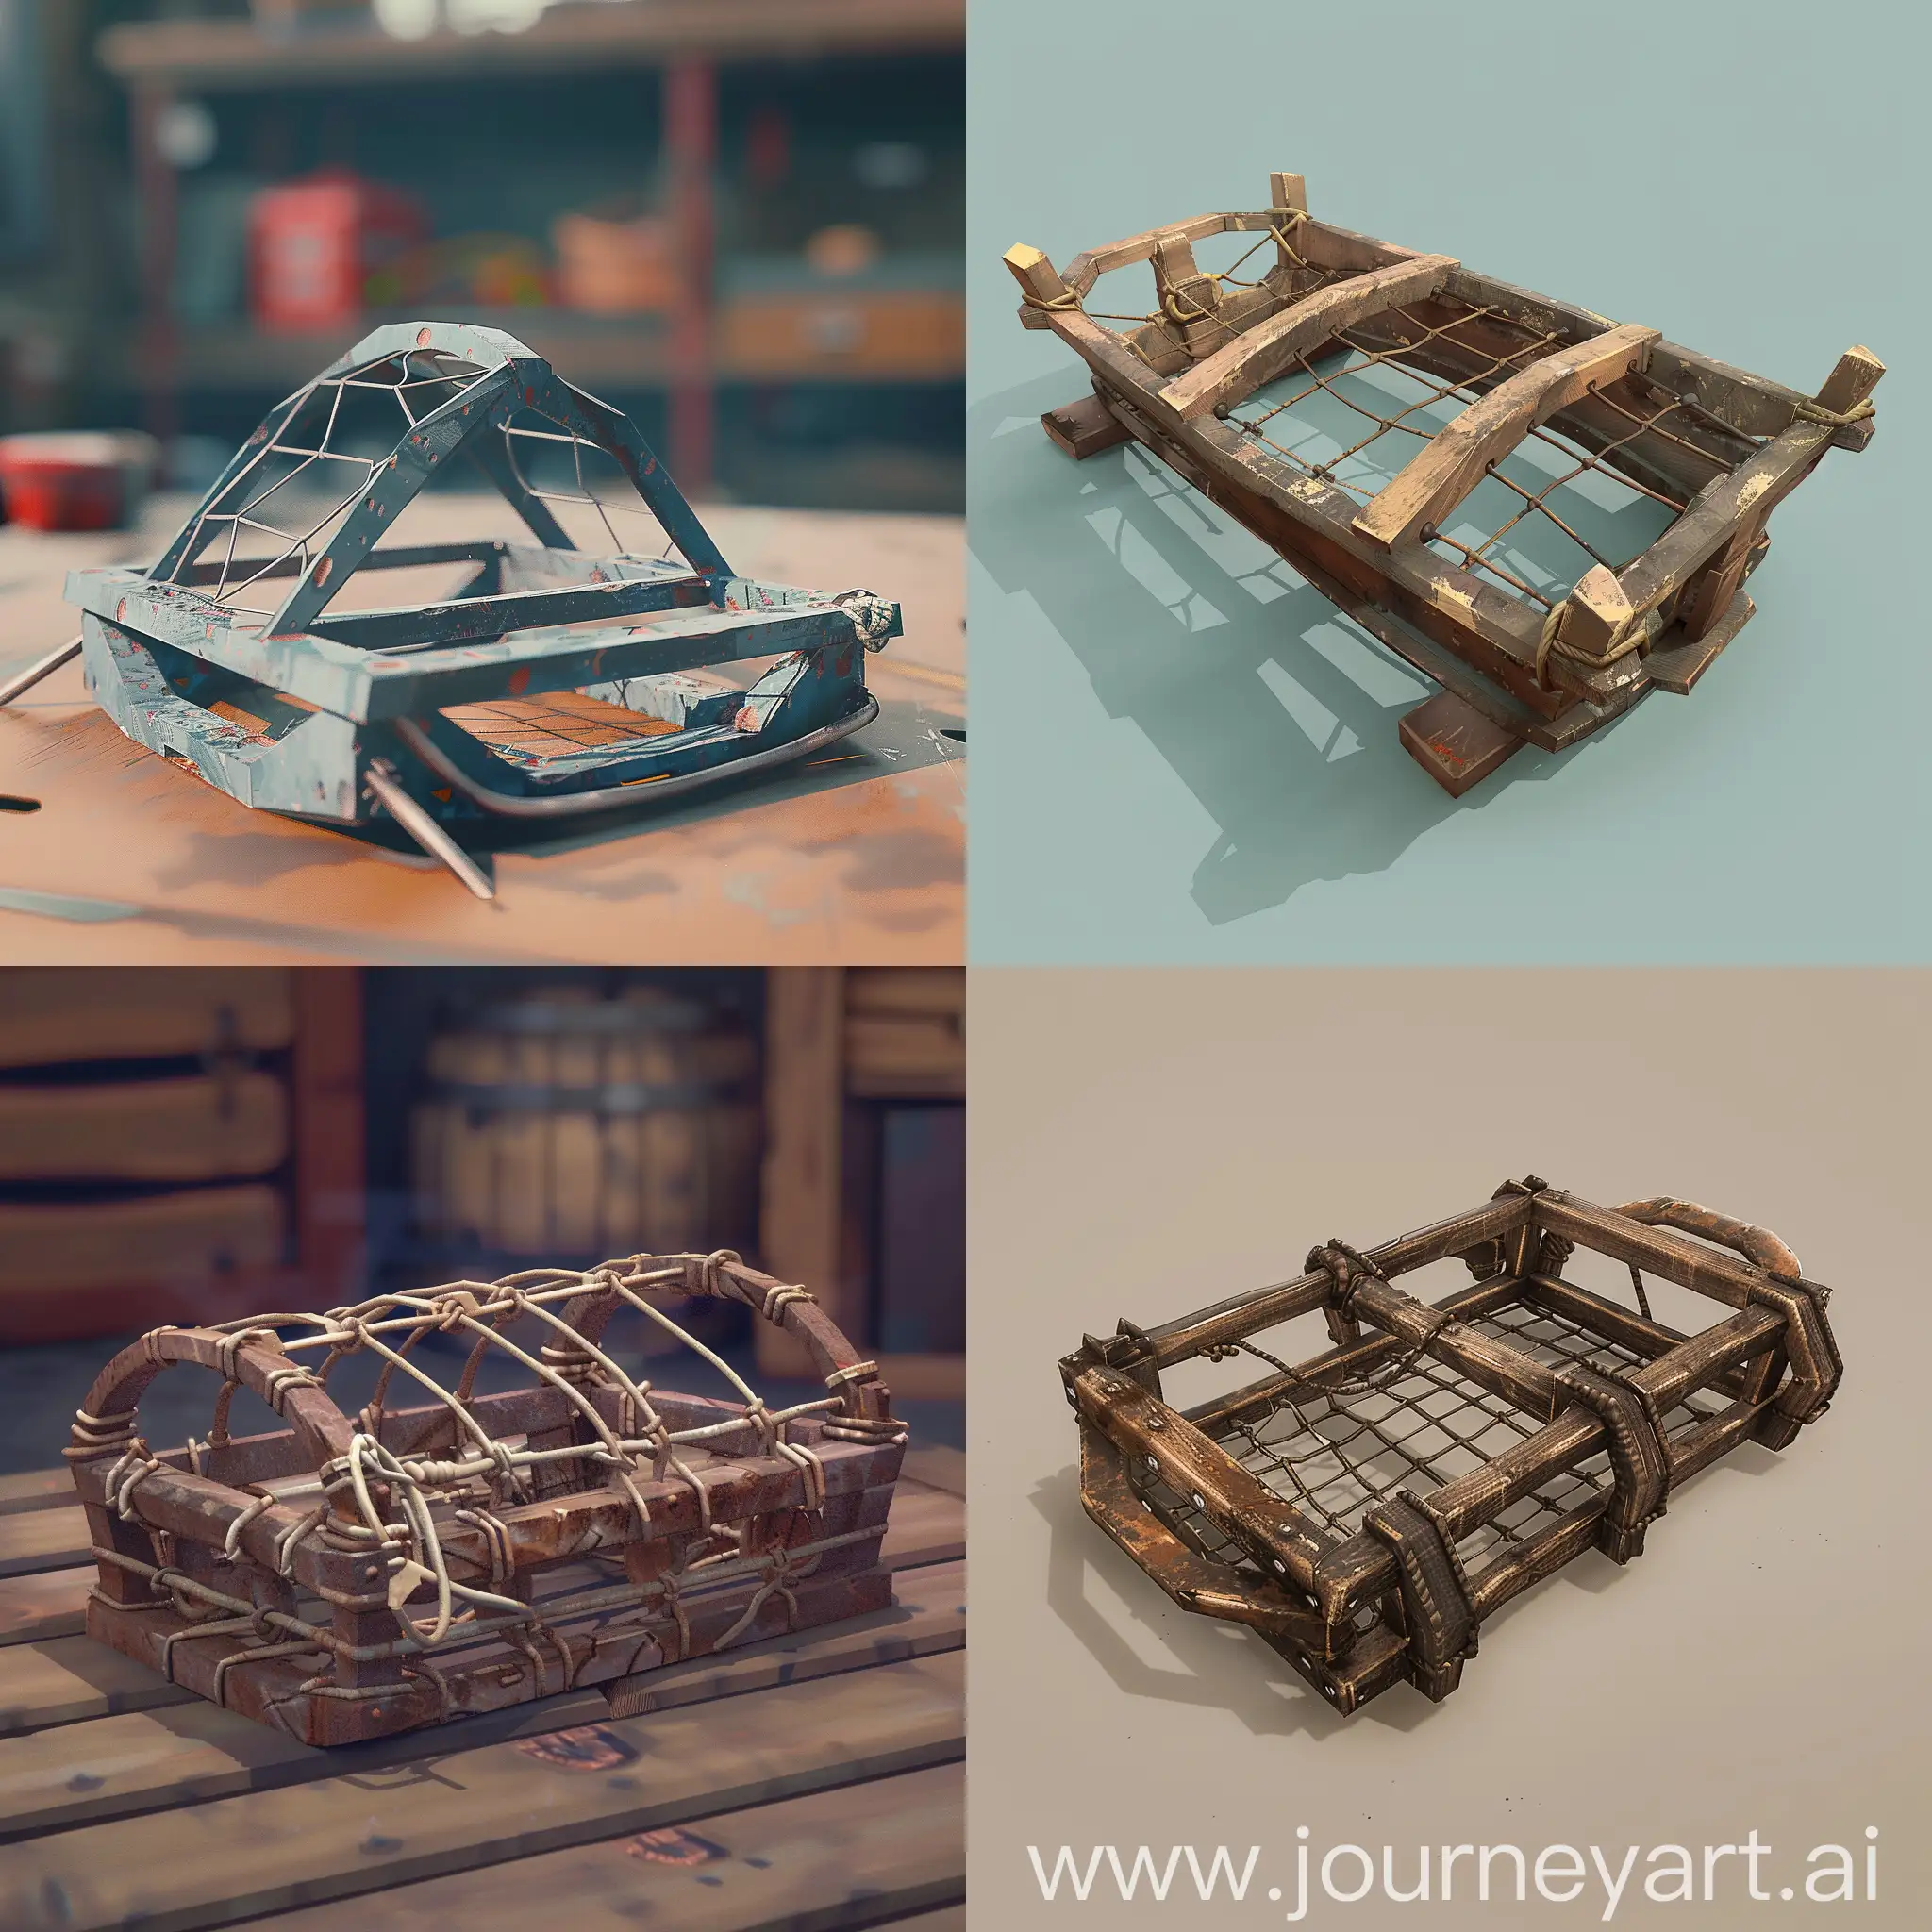 lowpoly 3D model of an empty lobster trap reminiscent of old-school games. Capture the essence of nostalgia with this classic visual element, perfect for immersing users in a journey down memory lane.